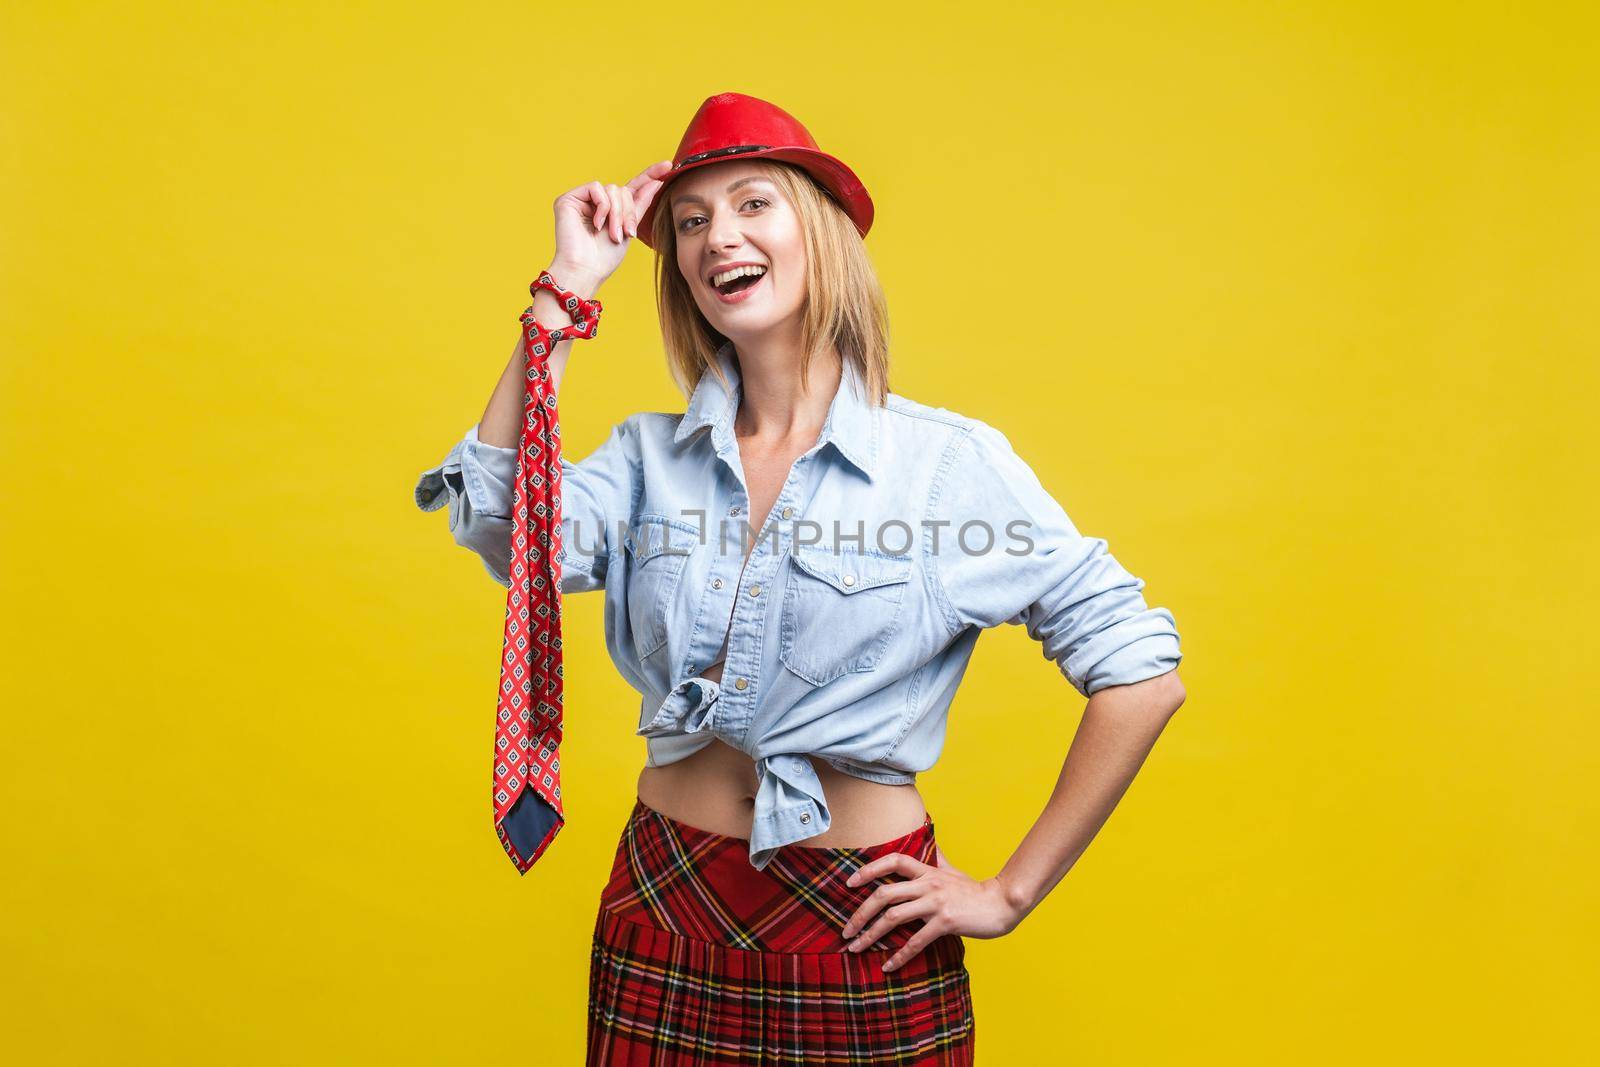 Portrait of charming playful girl looking stylish in denim shirt, school skirt and tie knotted on hand, touching hat on head as if greeting, fashion trend. studio shot isolated on yellow background